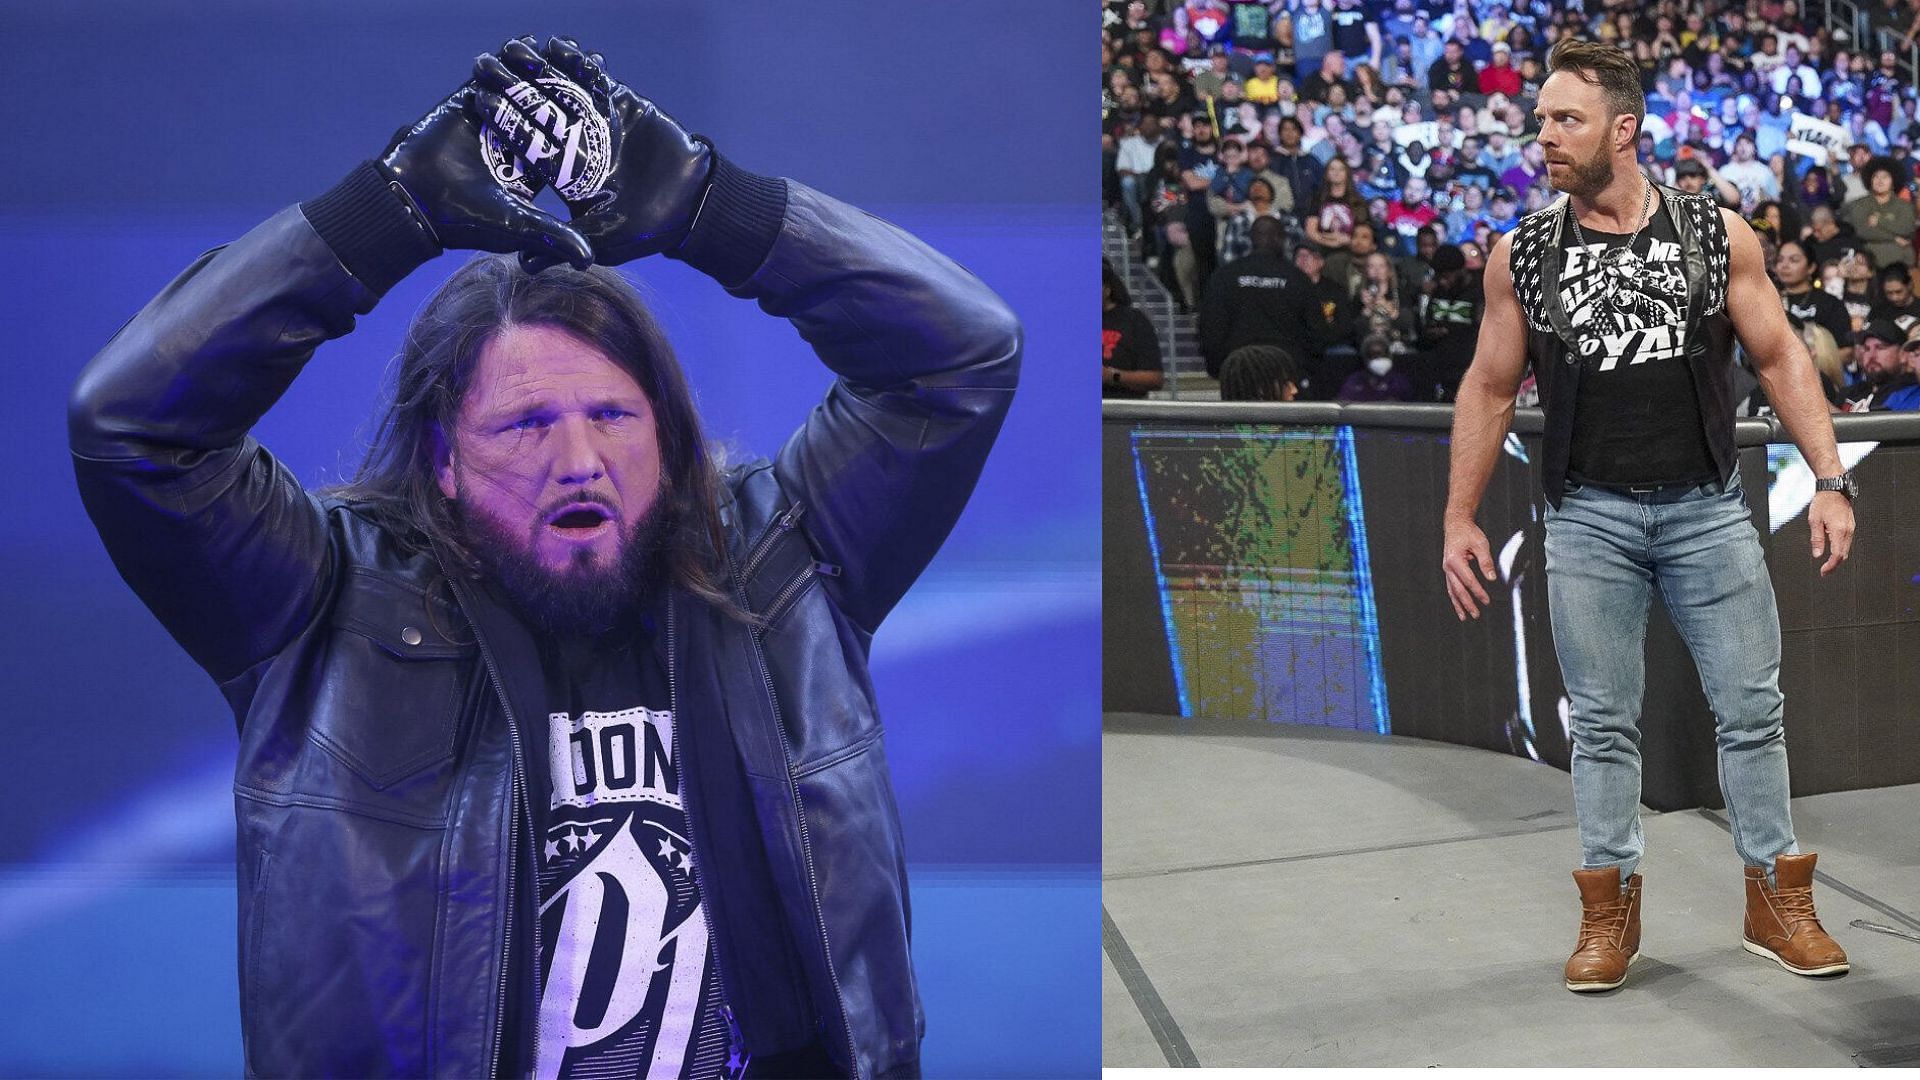 AJ Styles and LA Knight are on a collision course.